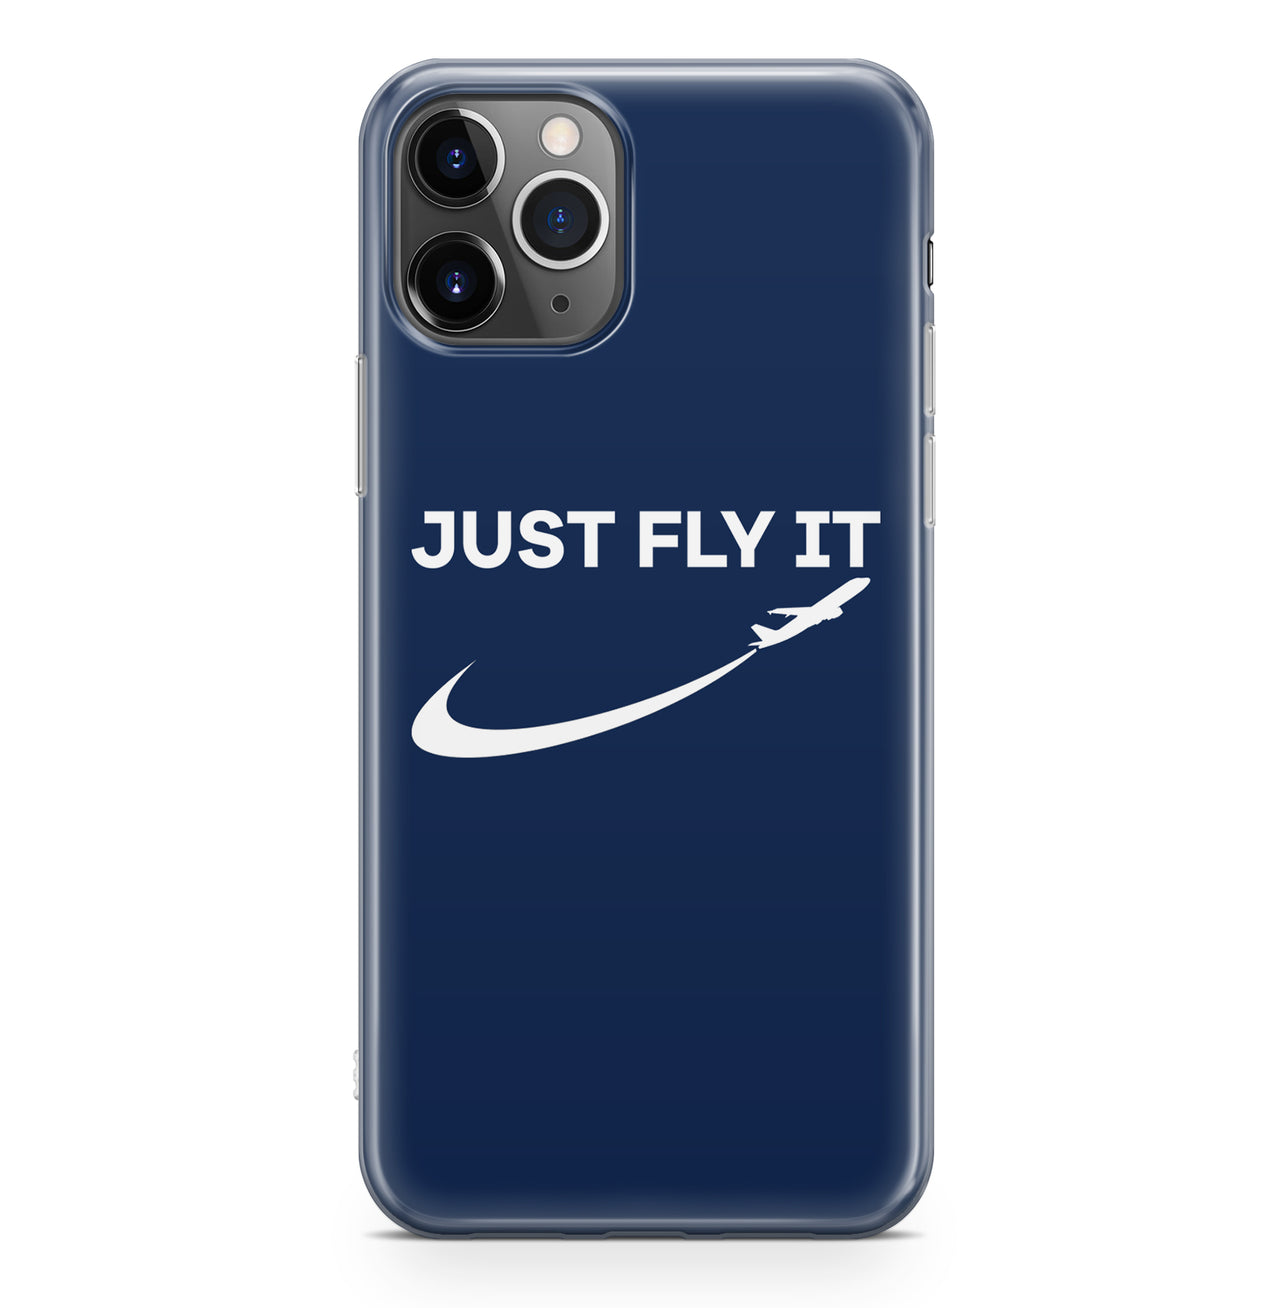 Just Fly It 2 Designed iPhone Cases